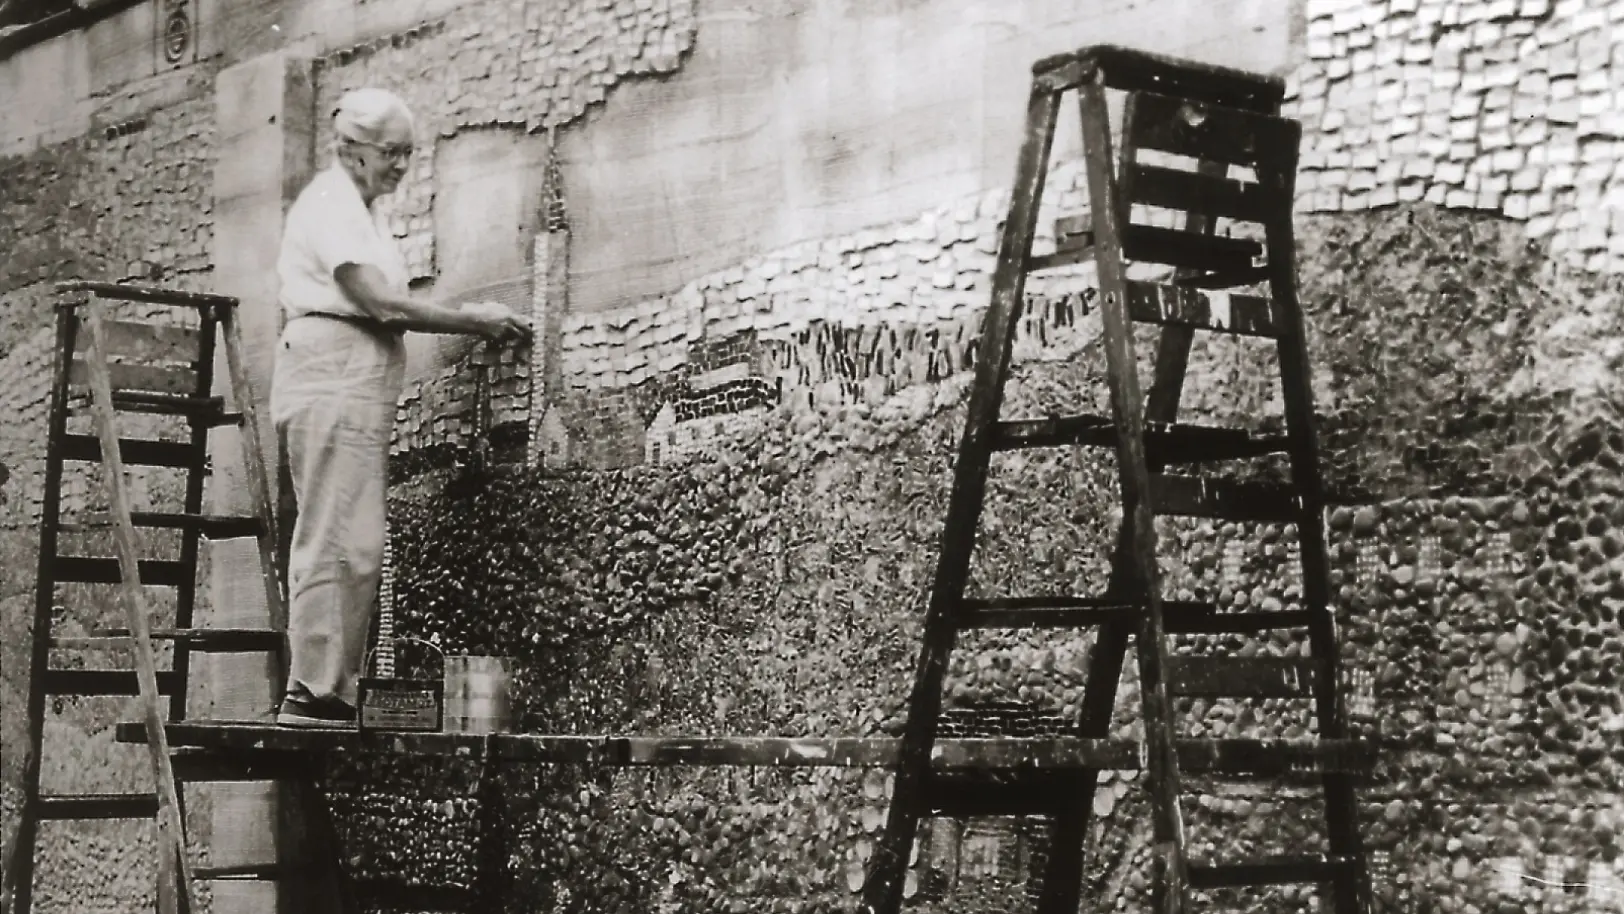 Historical Photo of artist creating tiled mural wall at the Kemper Center grounds in Kenosha, Wisconsin